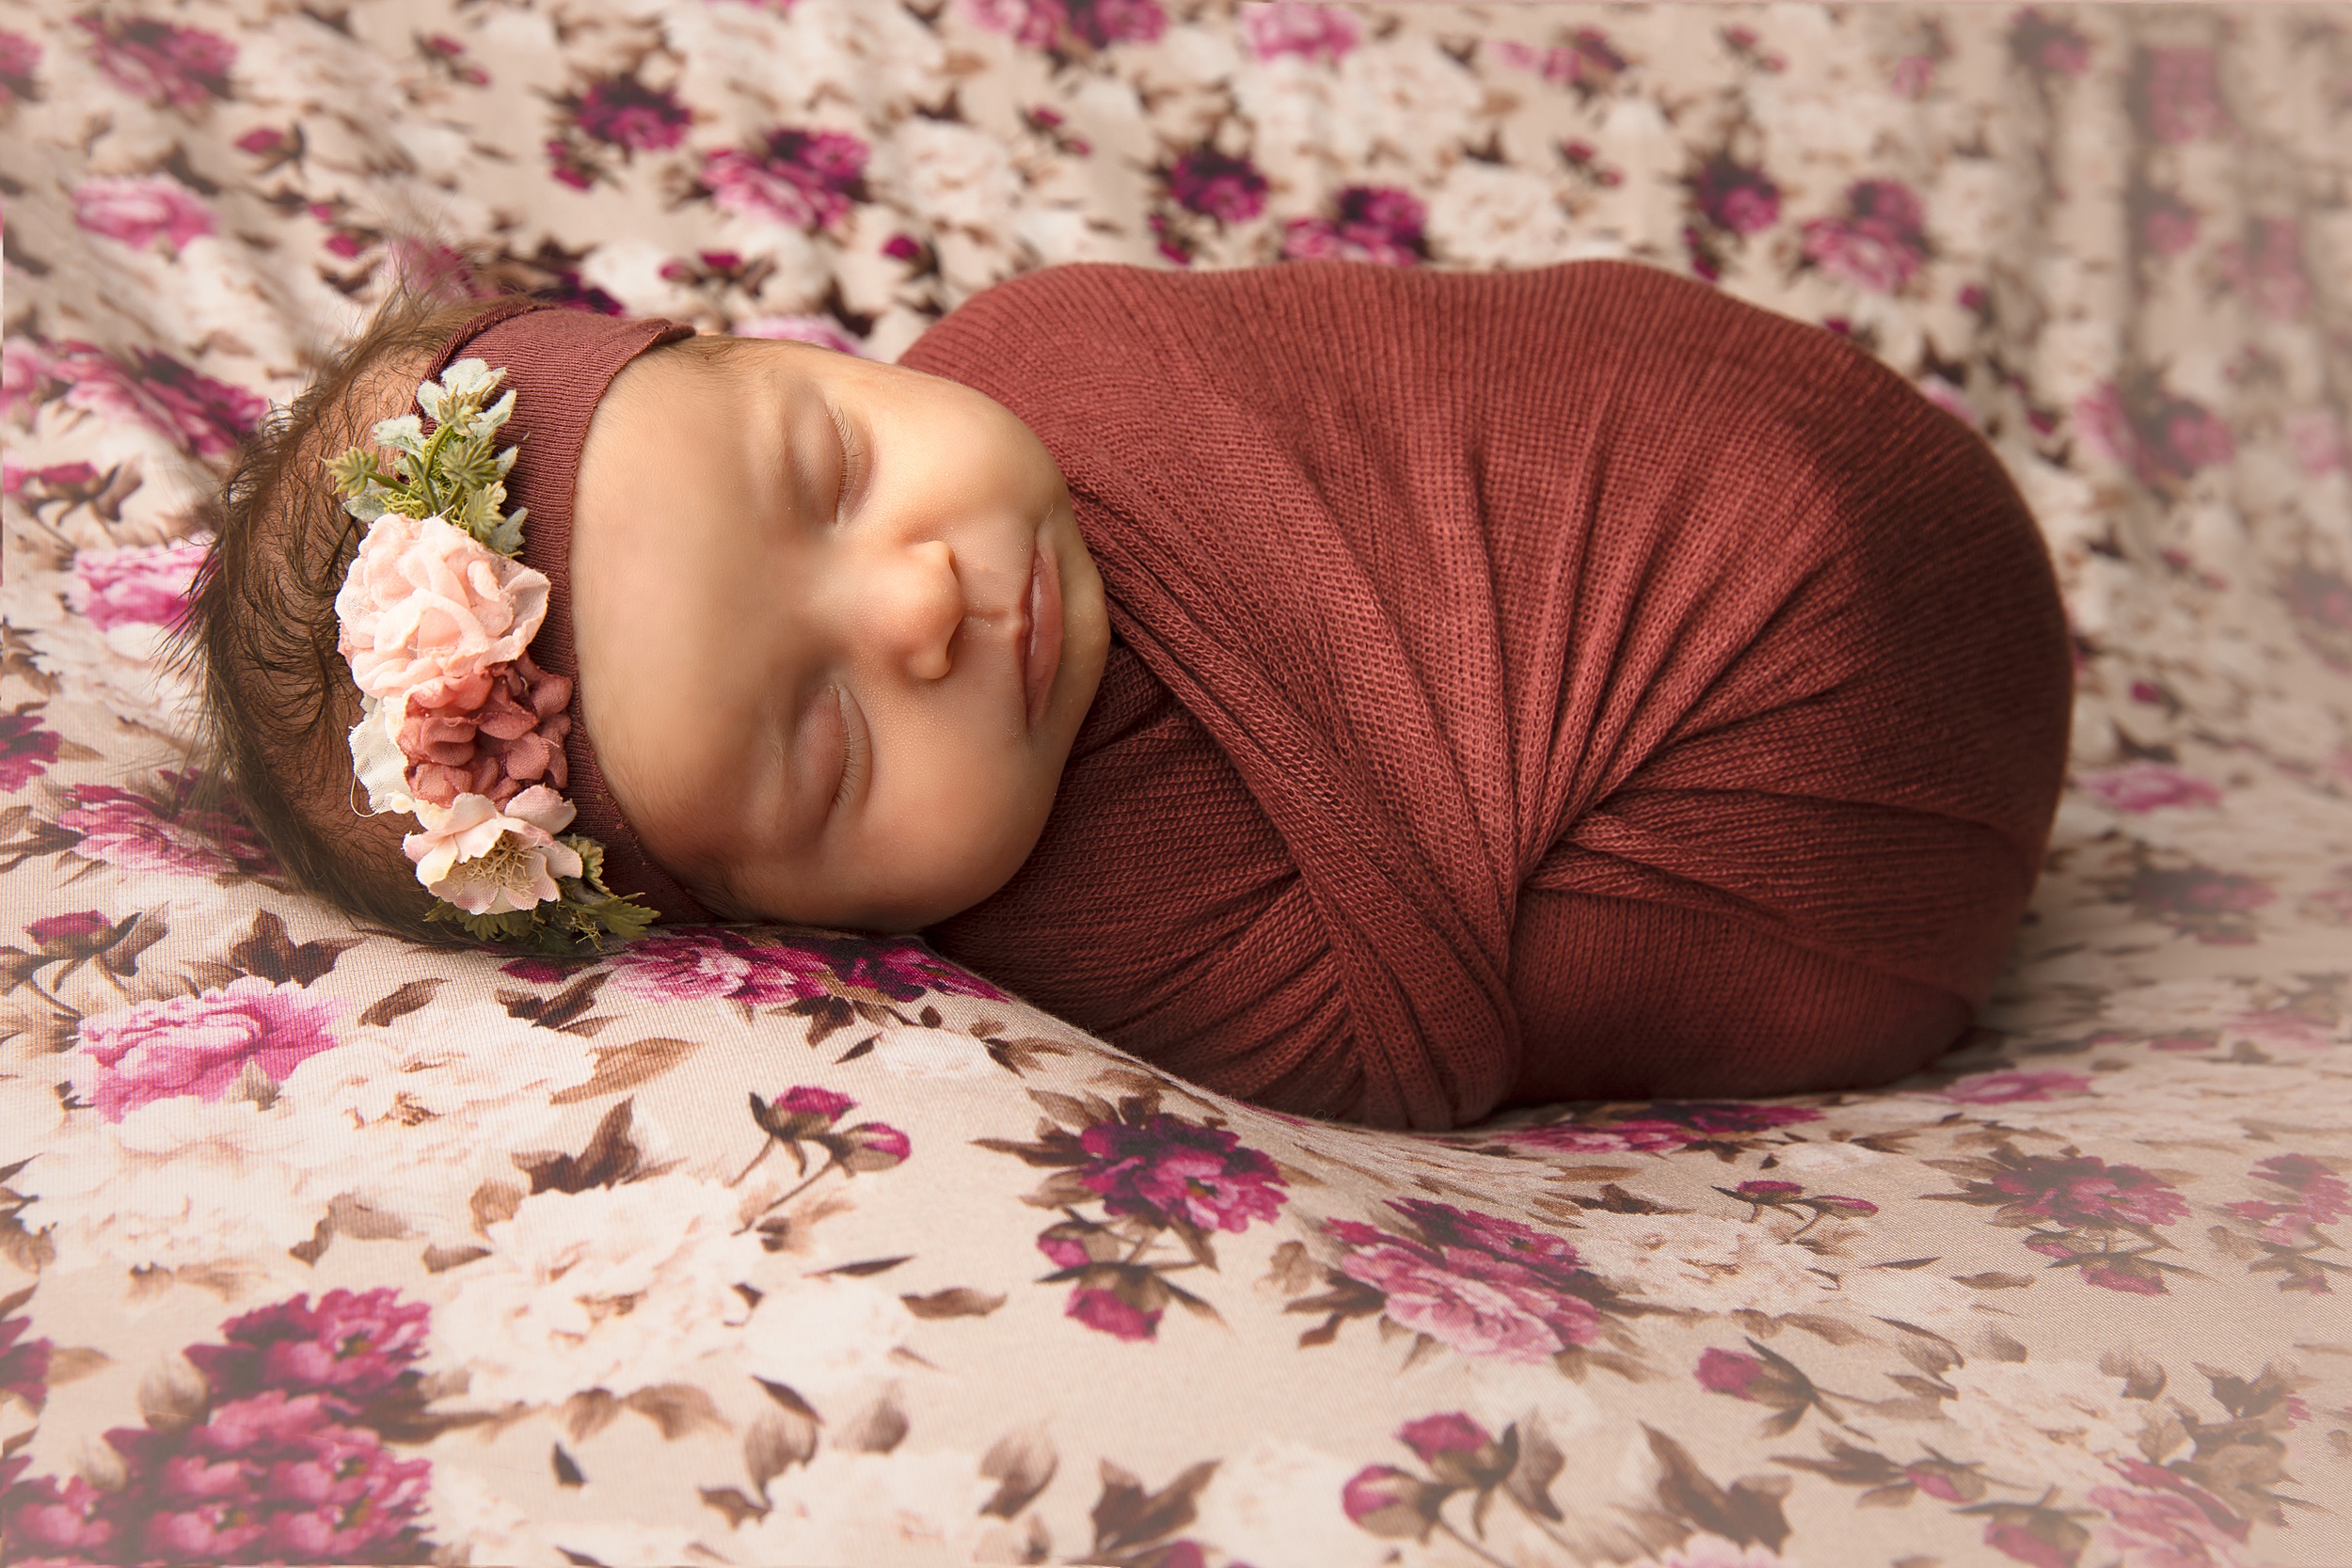 A newborn baby sleeps in a red swaddle on a floral pattern bed with a flower headband